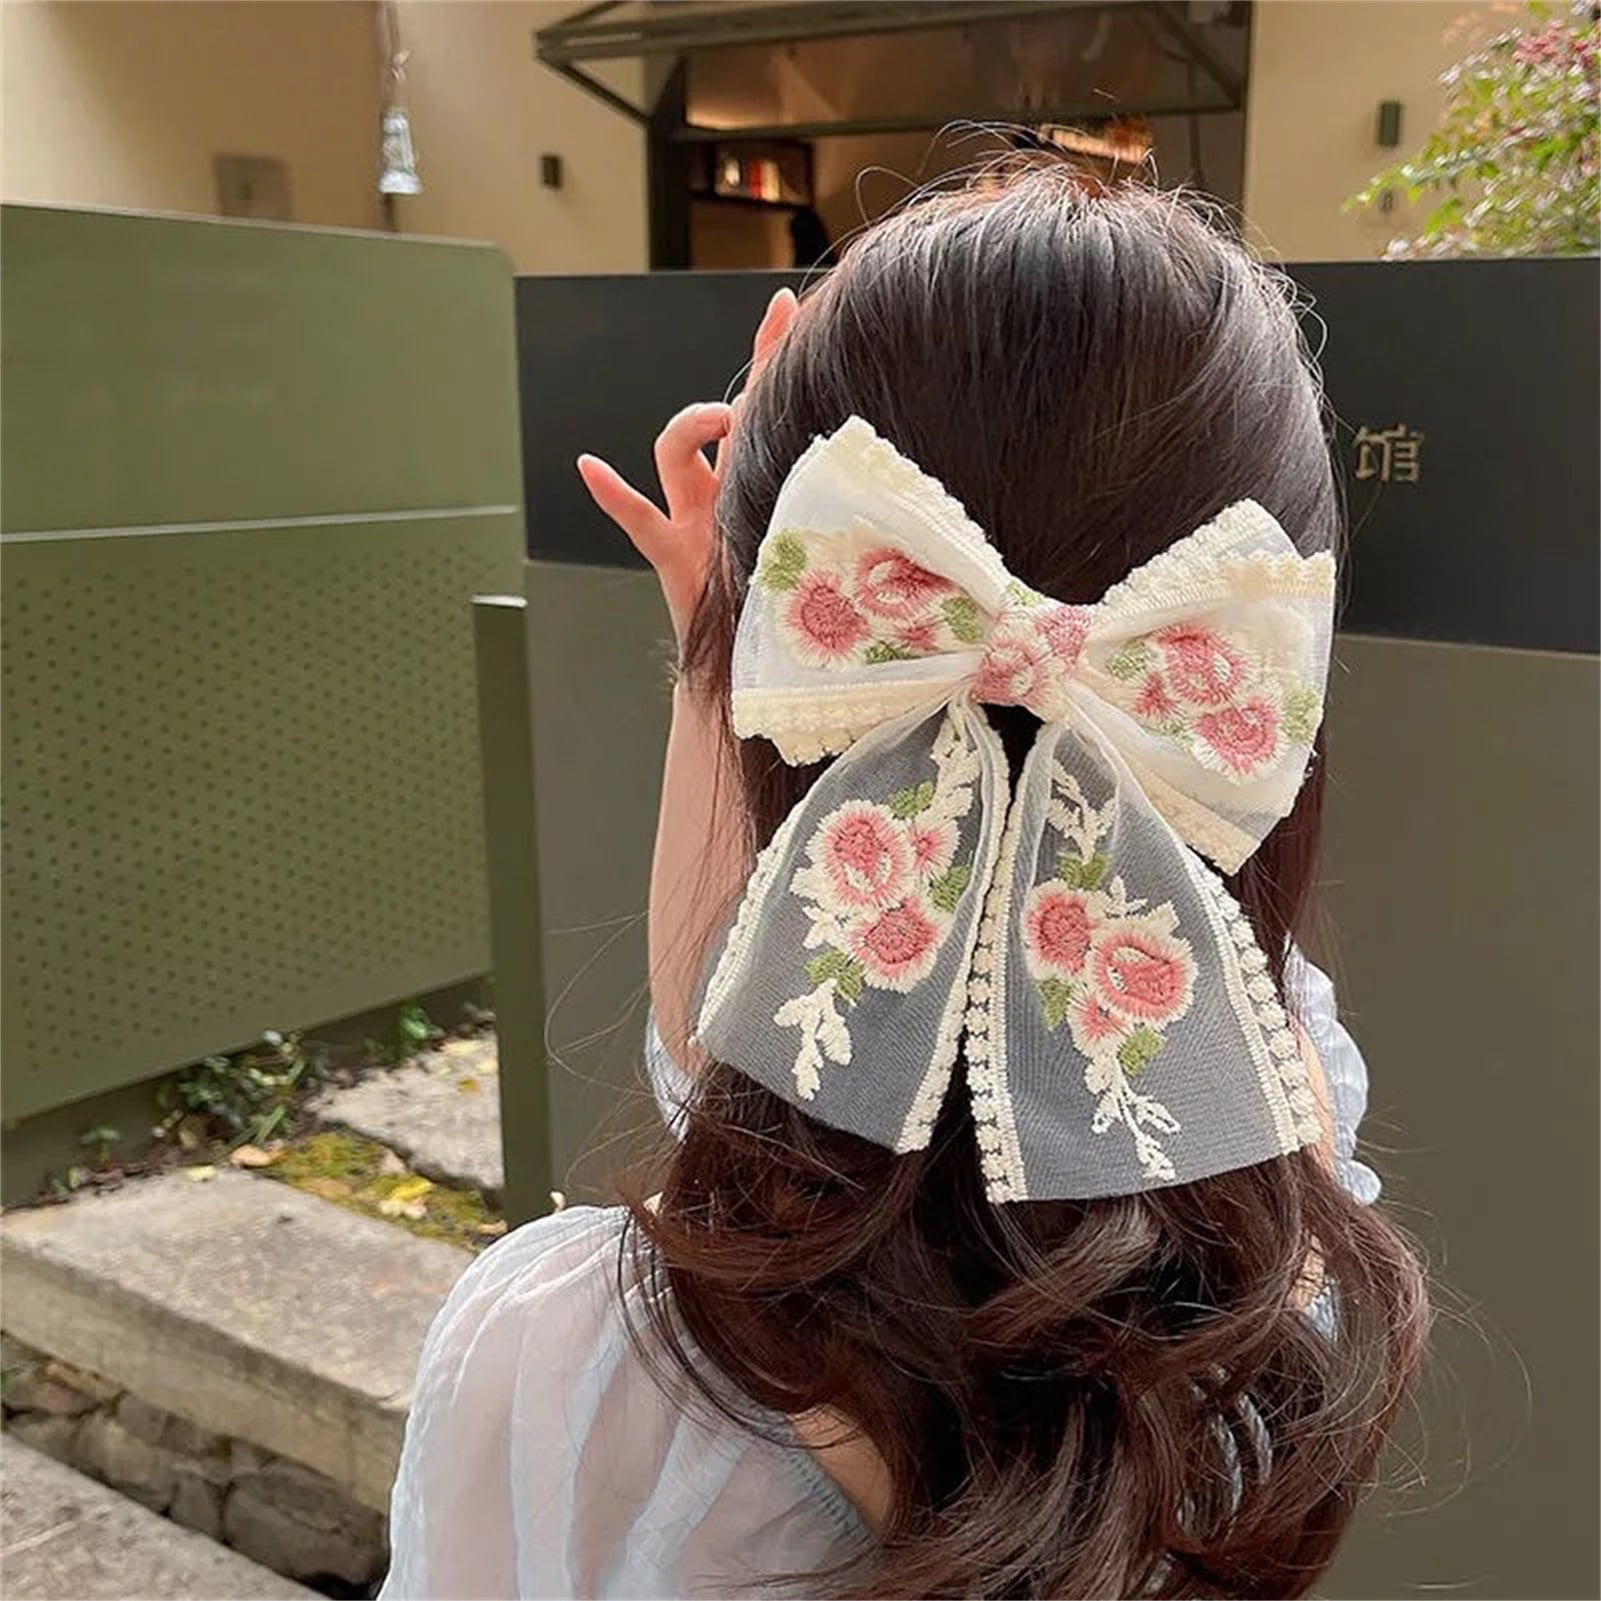 rygai 2Pcs Bow Hair Ribbons Soft Fabric Solid Color Long Tail Design  Adorable Non-Fading Dress-up Smooth Women Girls Hair Ribbon Bow Hair Ties  Decor for Women,Black 